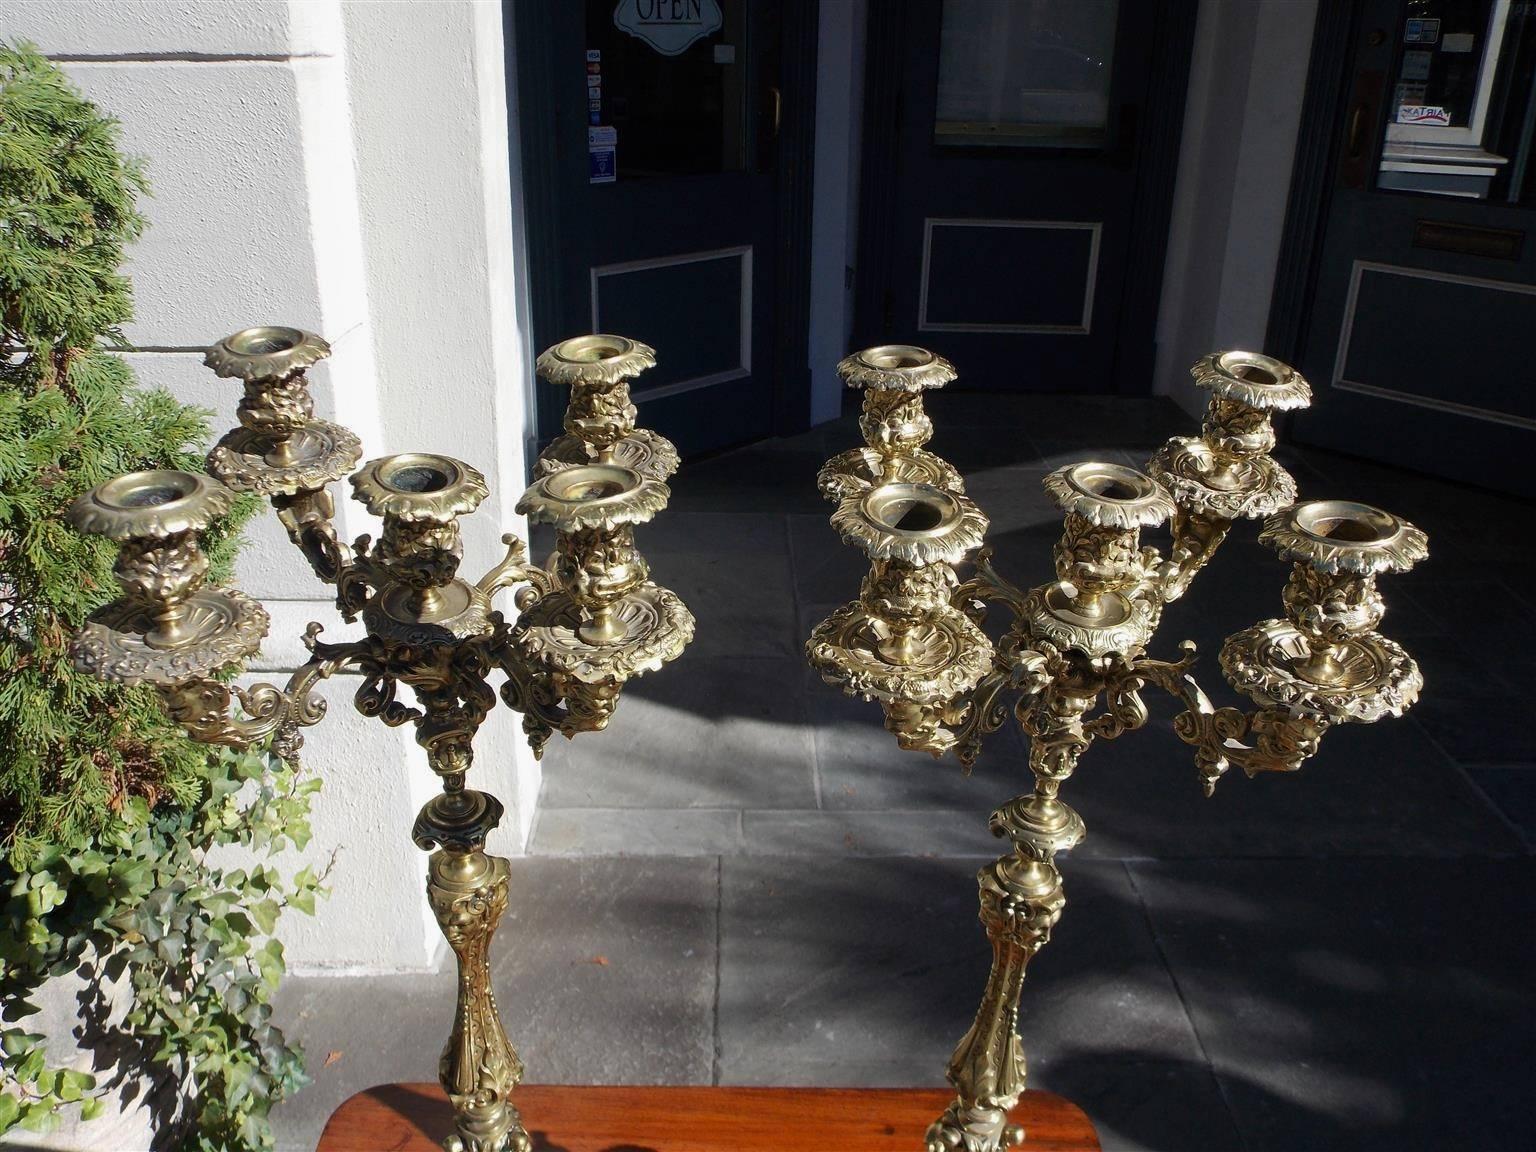 Pair of Italian Bronze Figural and Floral Candelabras, Circa 1830 In Excellent Condition For Sale In Hollywood, SC